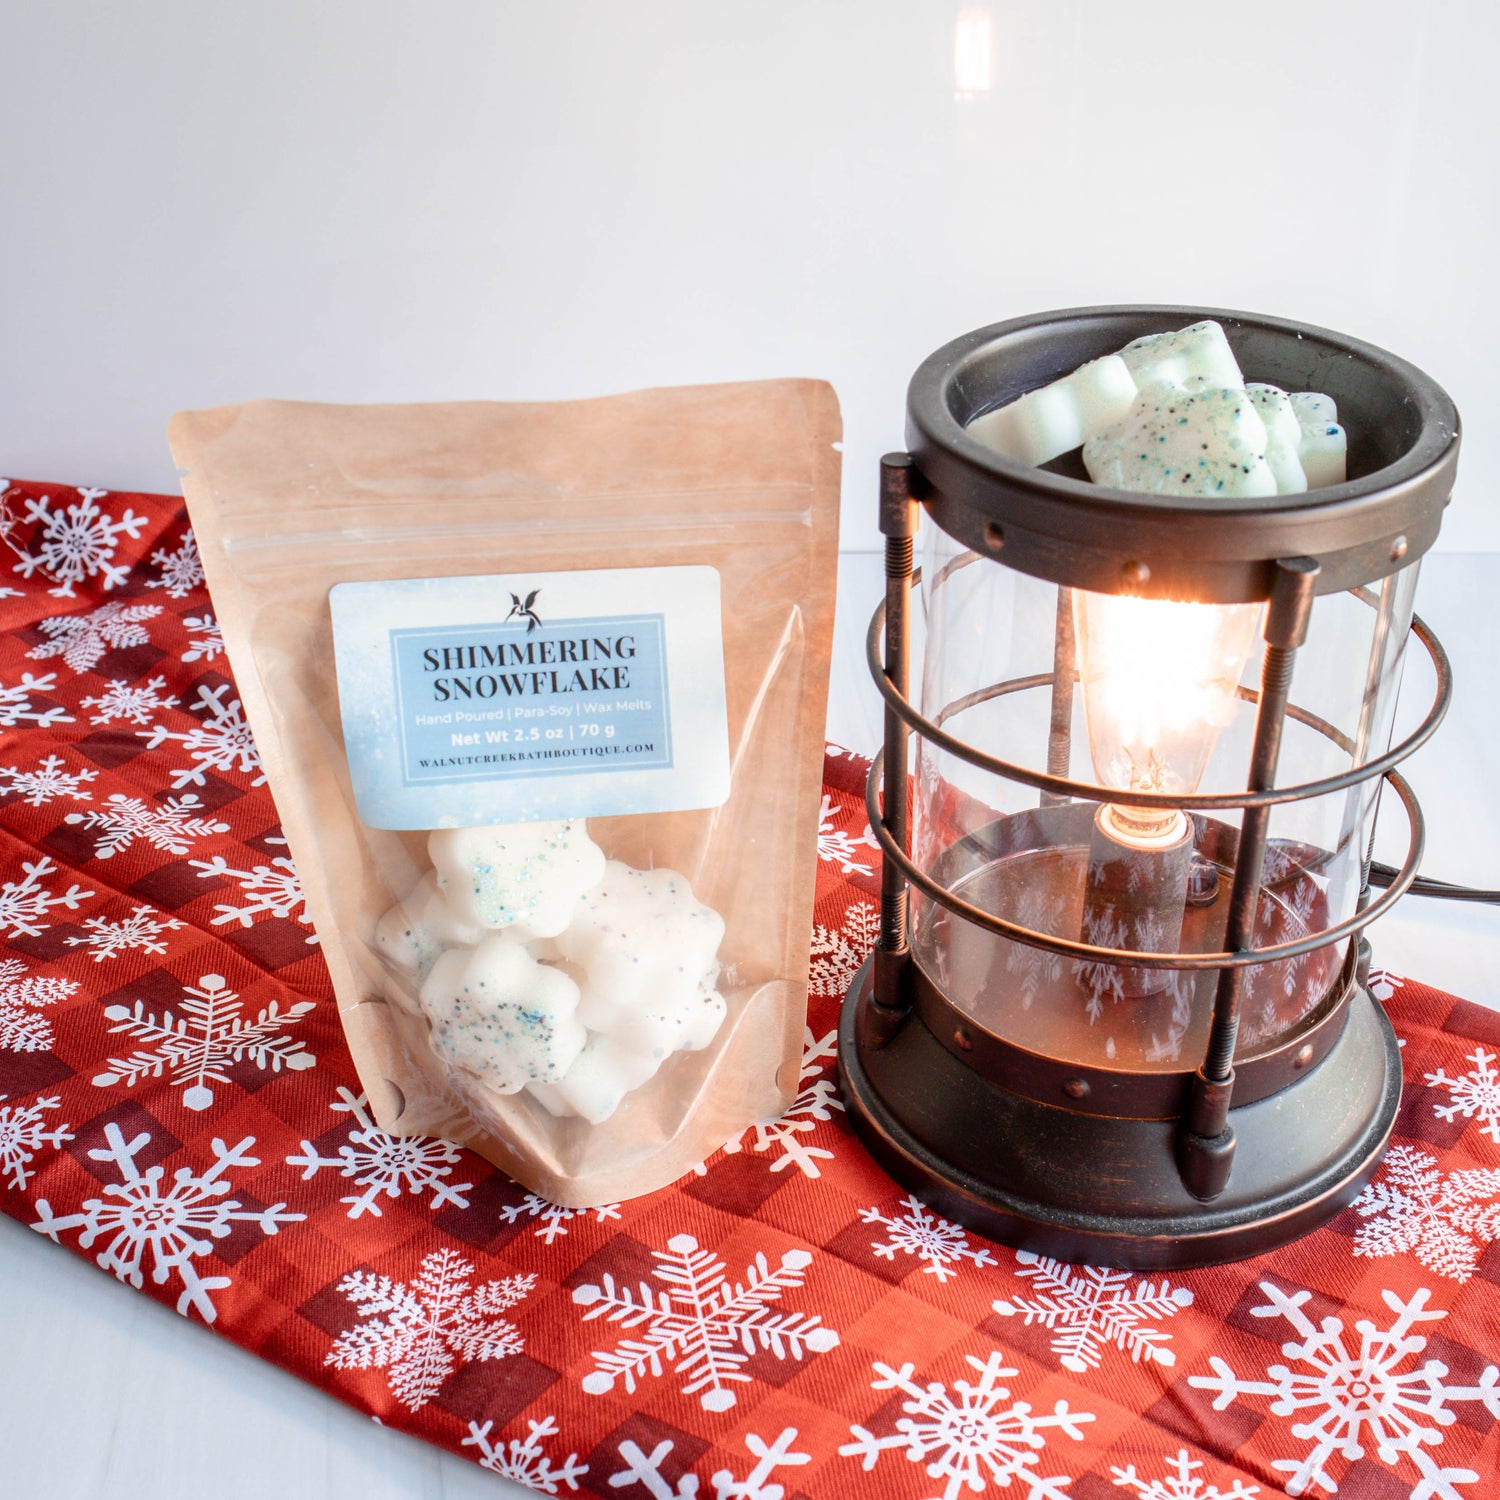 shimmering snowflake wax melts are cute snowflake forms in a bag. the bag is next to a burner with the snowflakes in the warming cup and they are sitting on a red cloth with snowflakes on it. White background